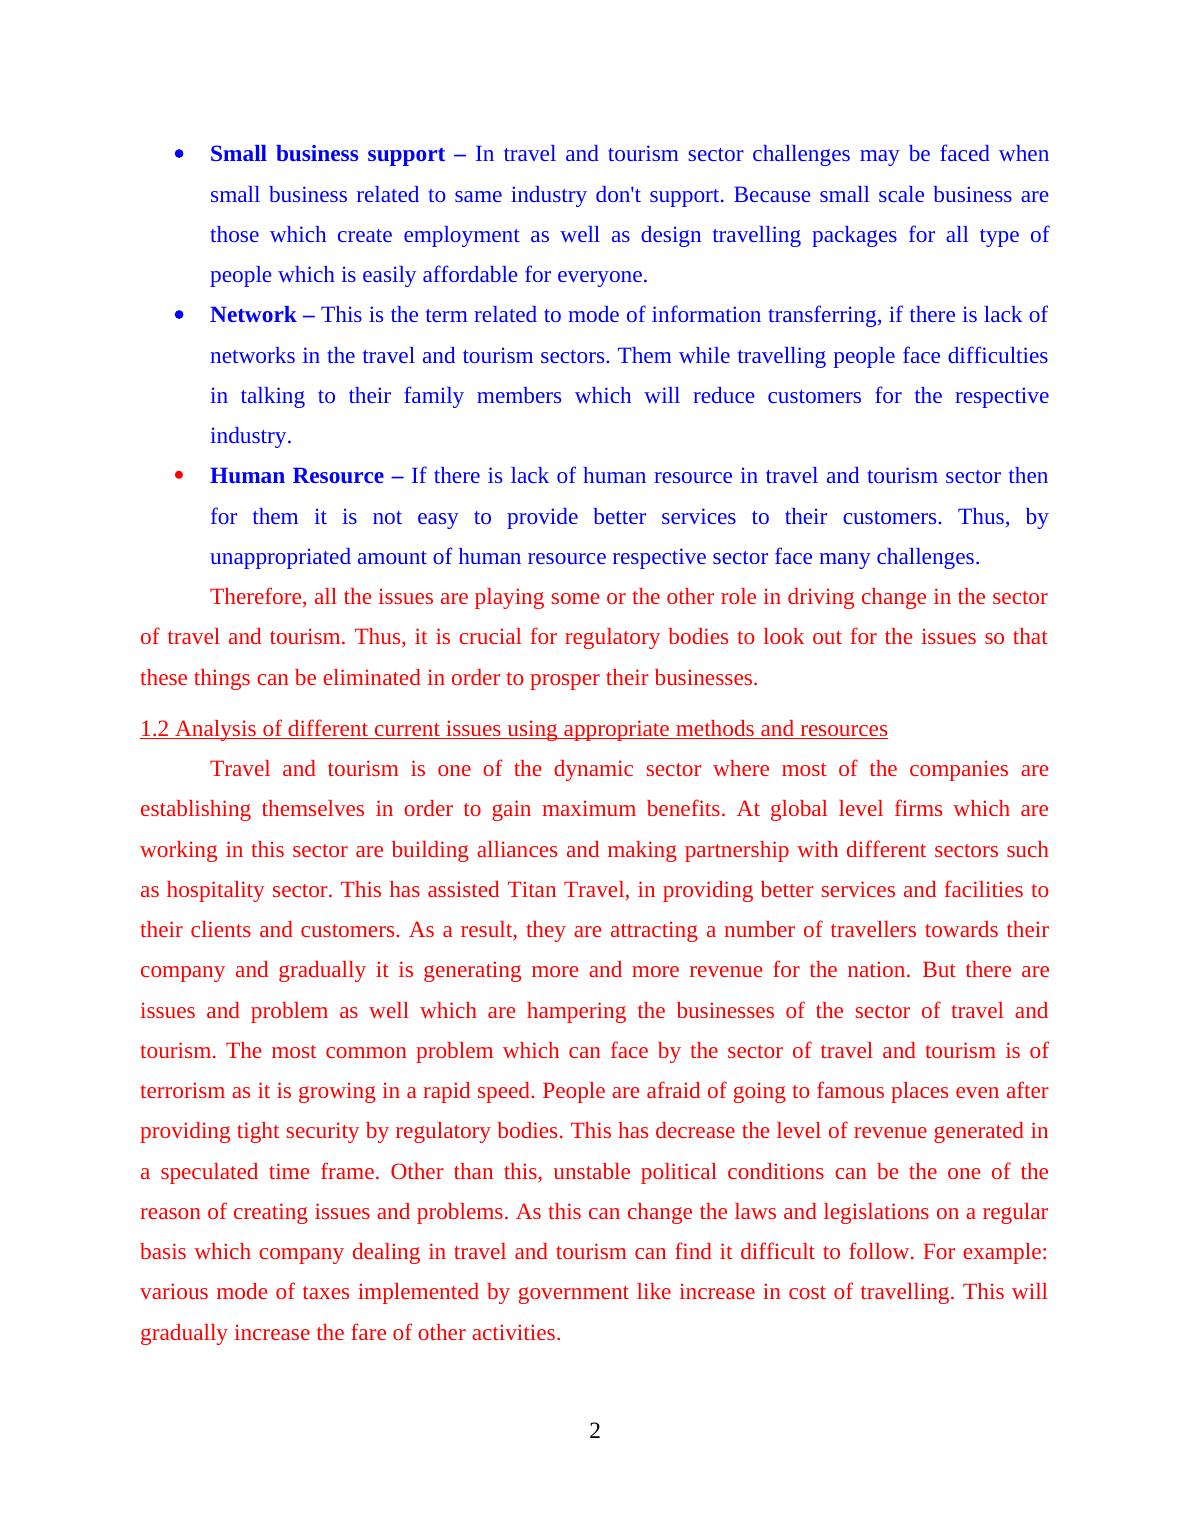 Contemporary Issues in Travel and Tourism: Assignment Solution_4